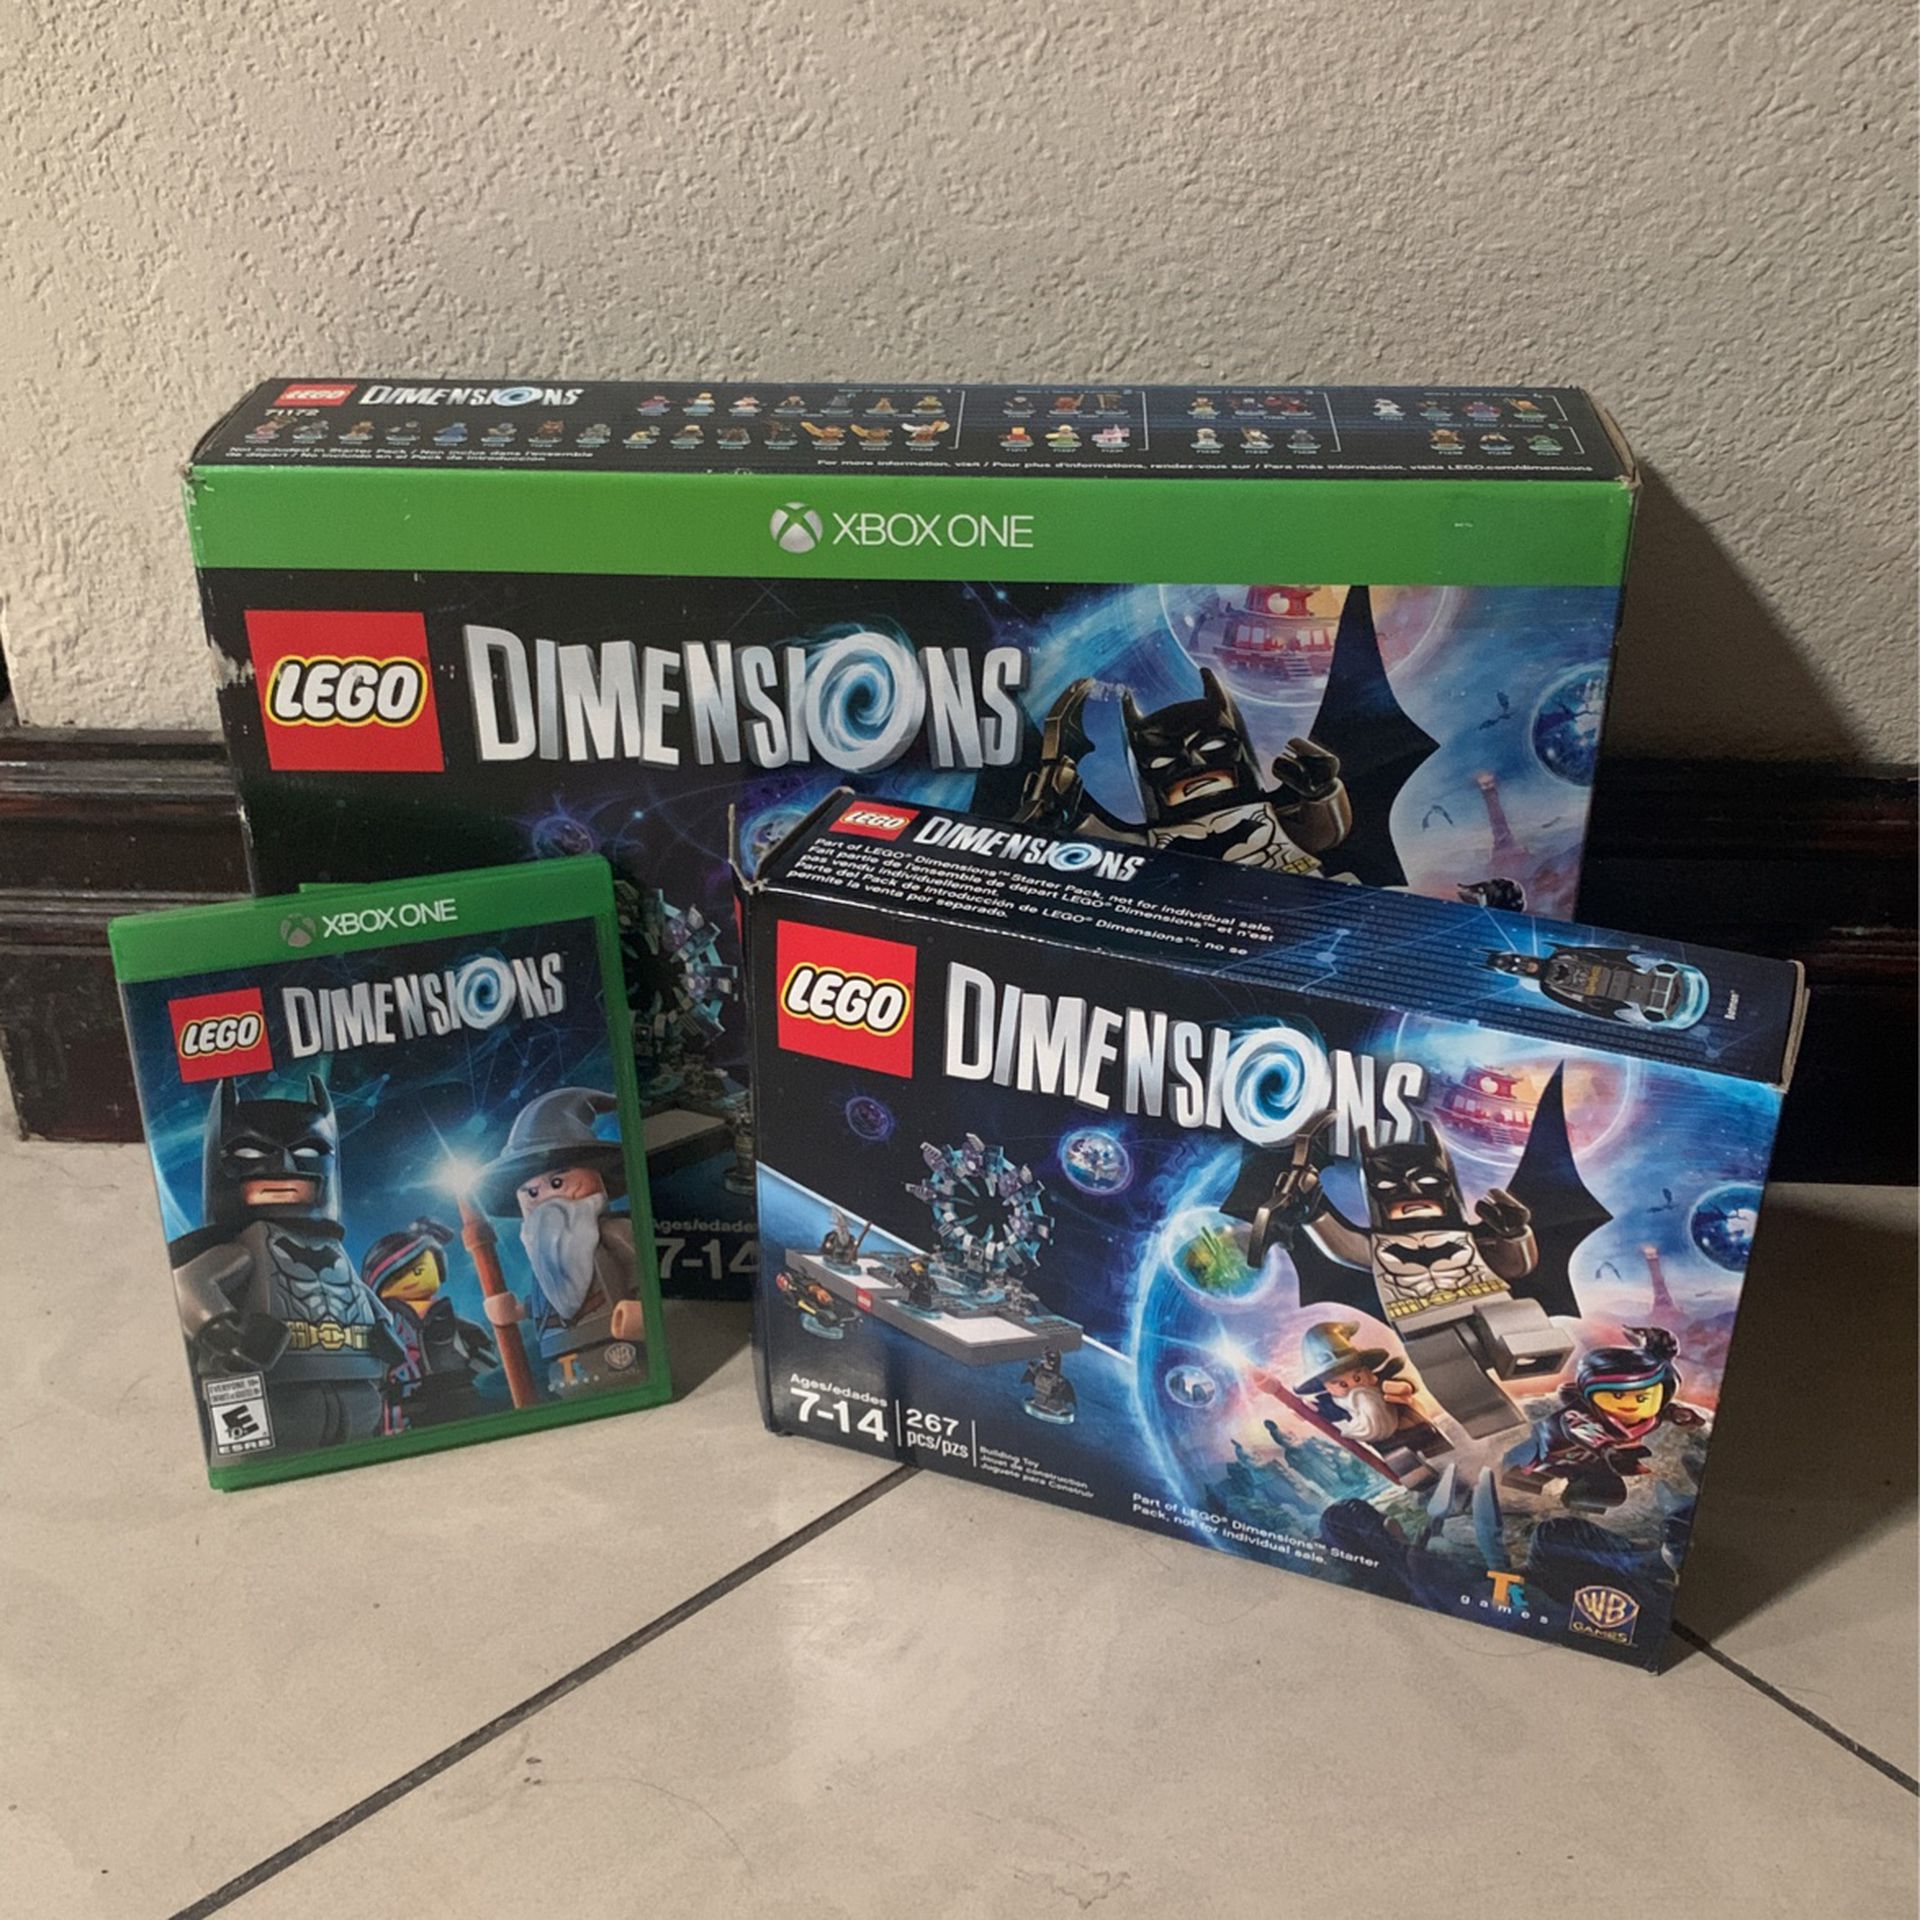 LEGO Dimensions Xbox One 2015 Game & Manual 1-2 players pre-owned